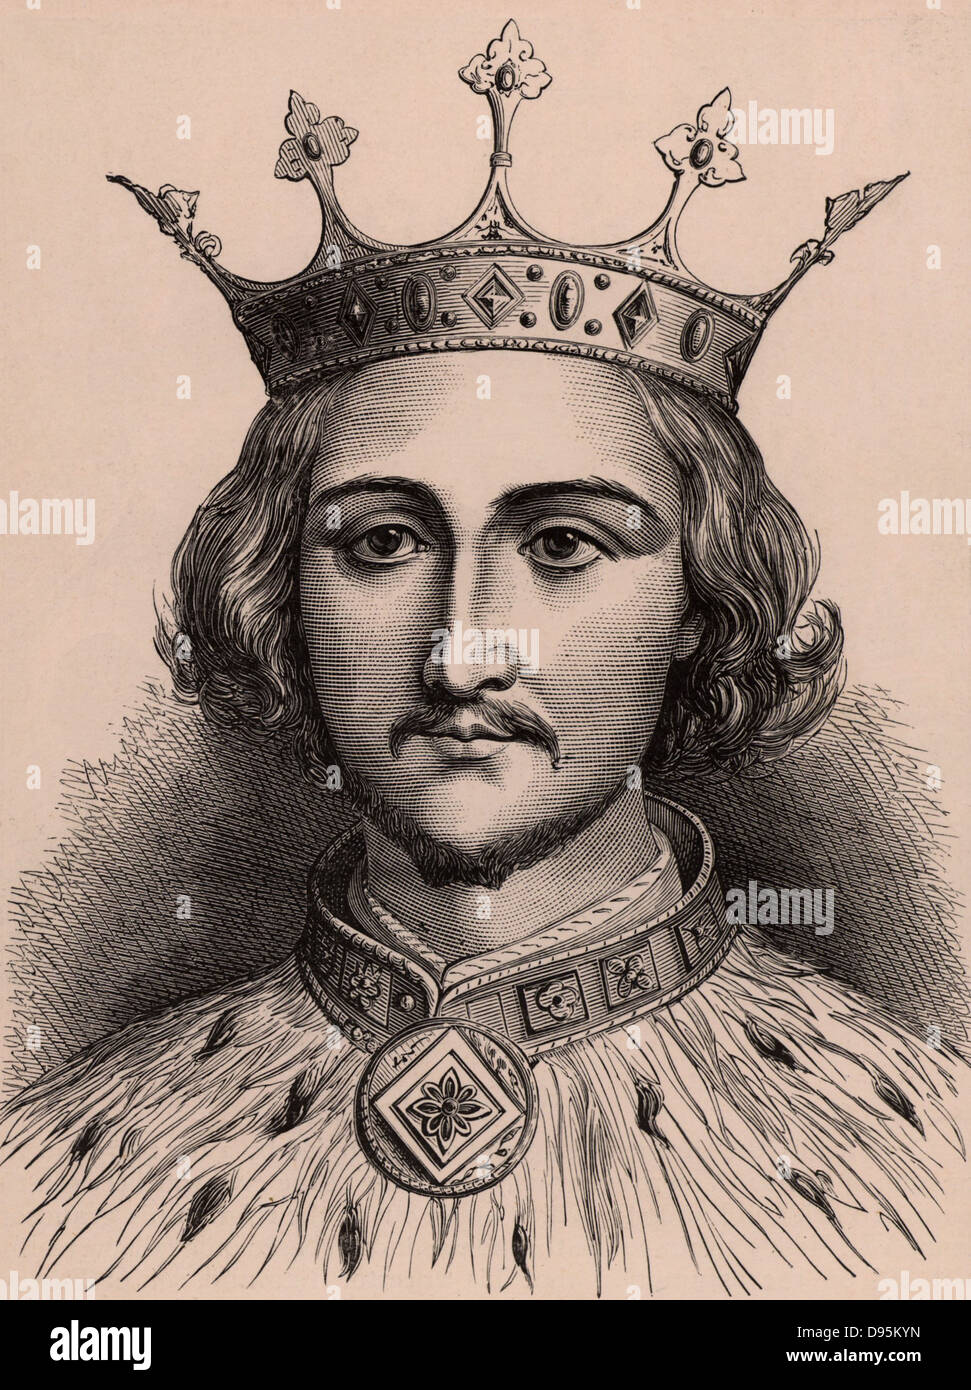 Richard II (1367-1400) king of England from 1377; forced to abdicate in September 1399 in favour of Henry Bolingbroke (Henry IV). Died, probably murdered, in Pontefract Castle early in 1400.  A member of the Plantagenet dynasty.  Wood engraving c1900. Stock Photo